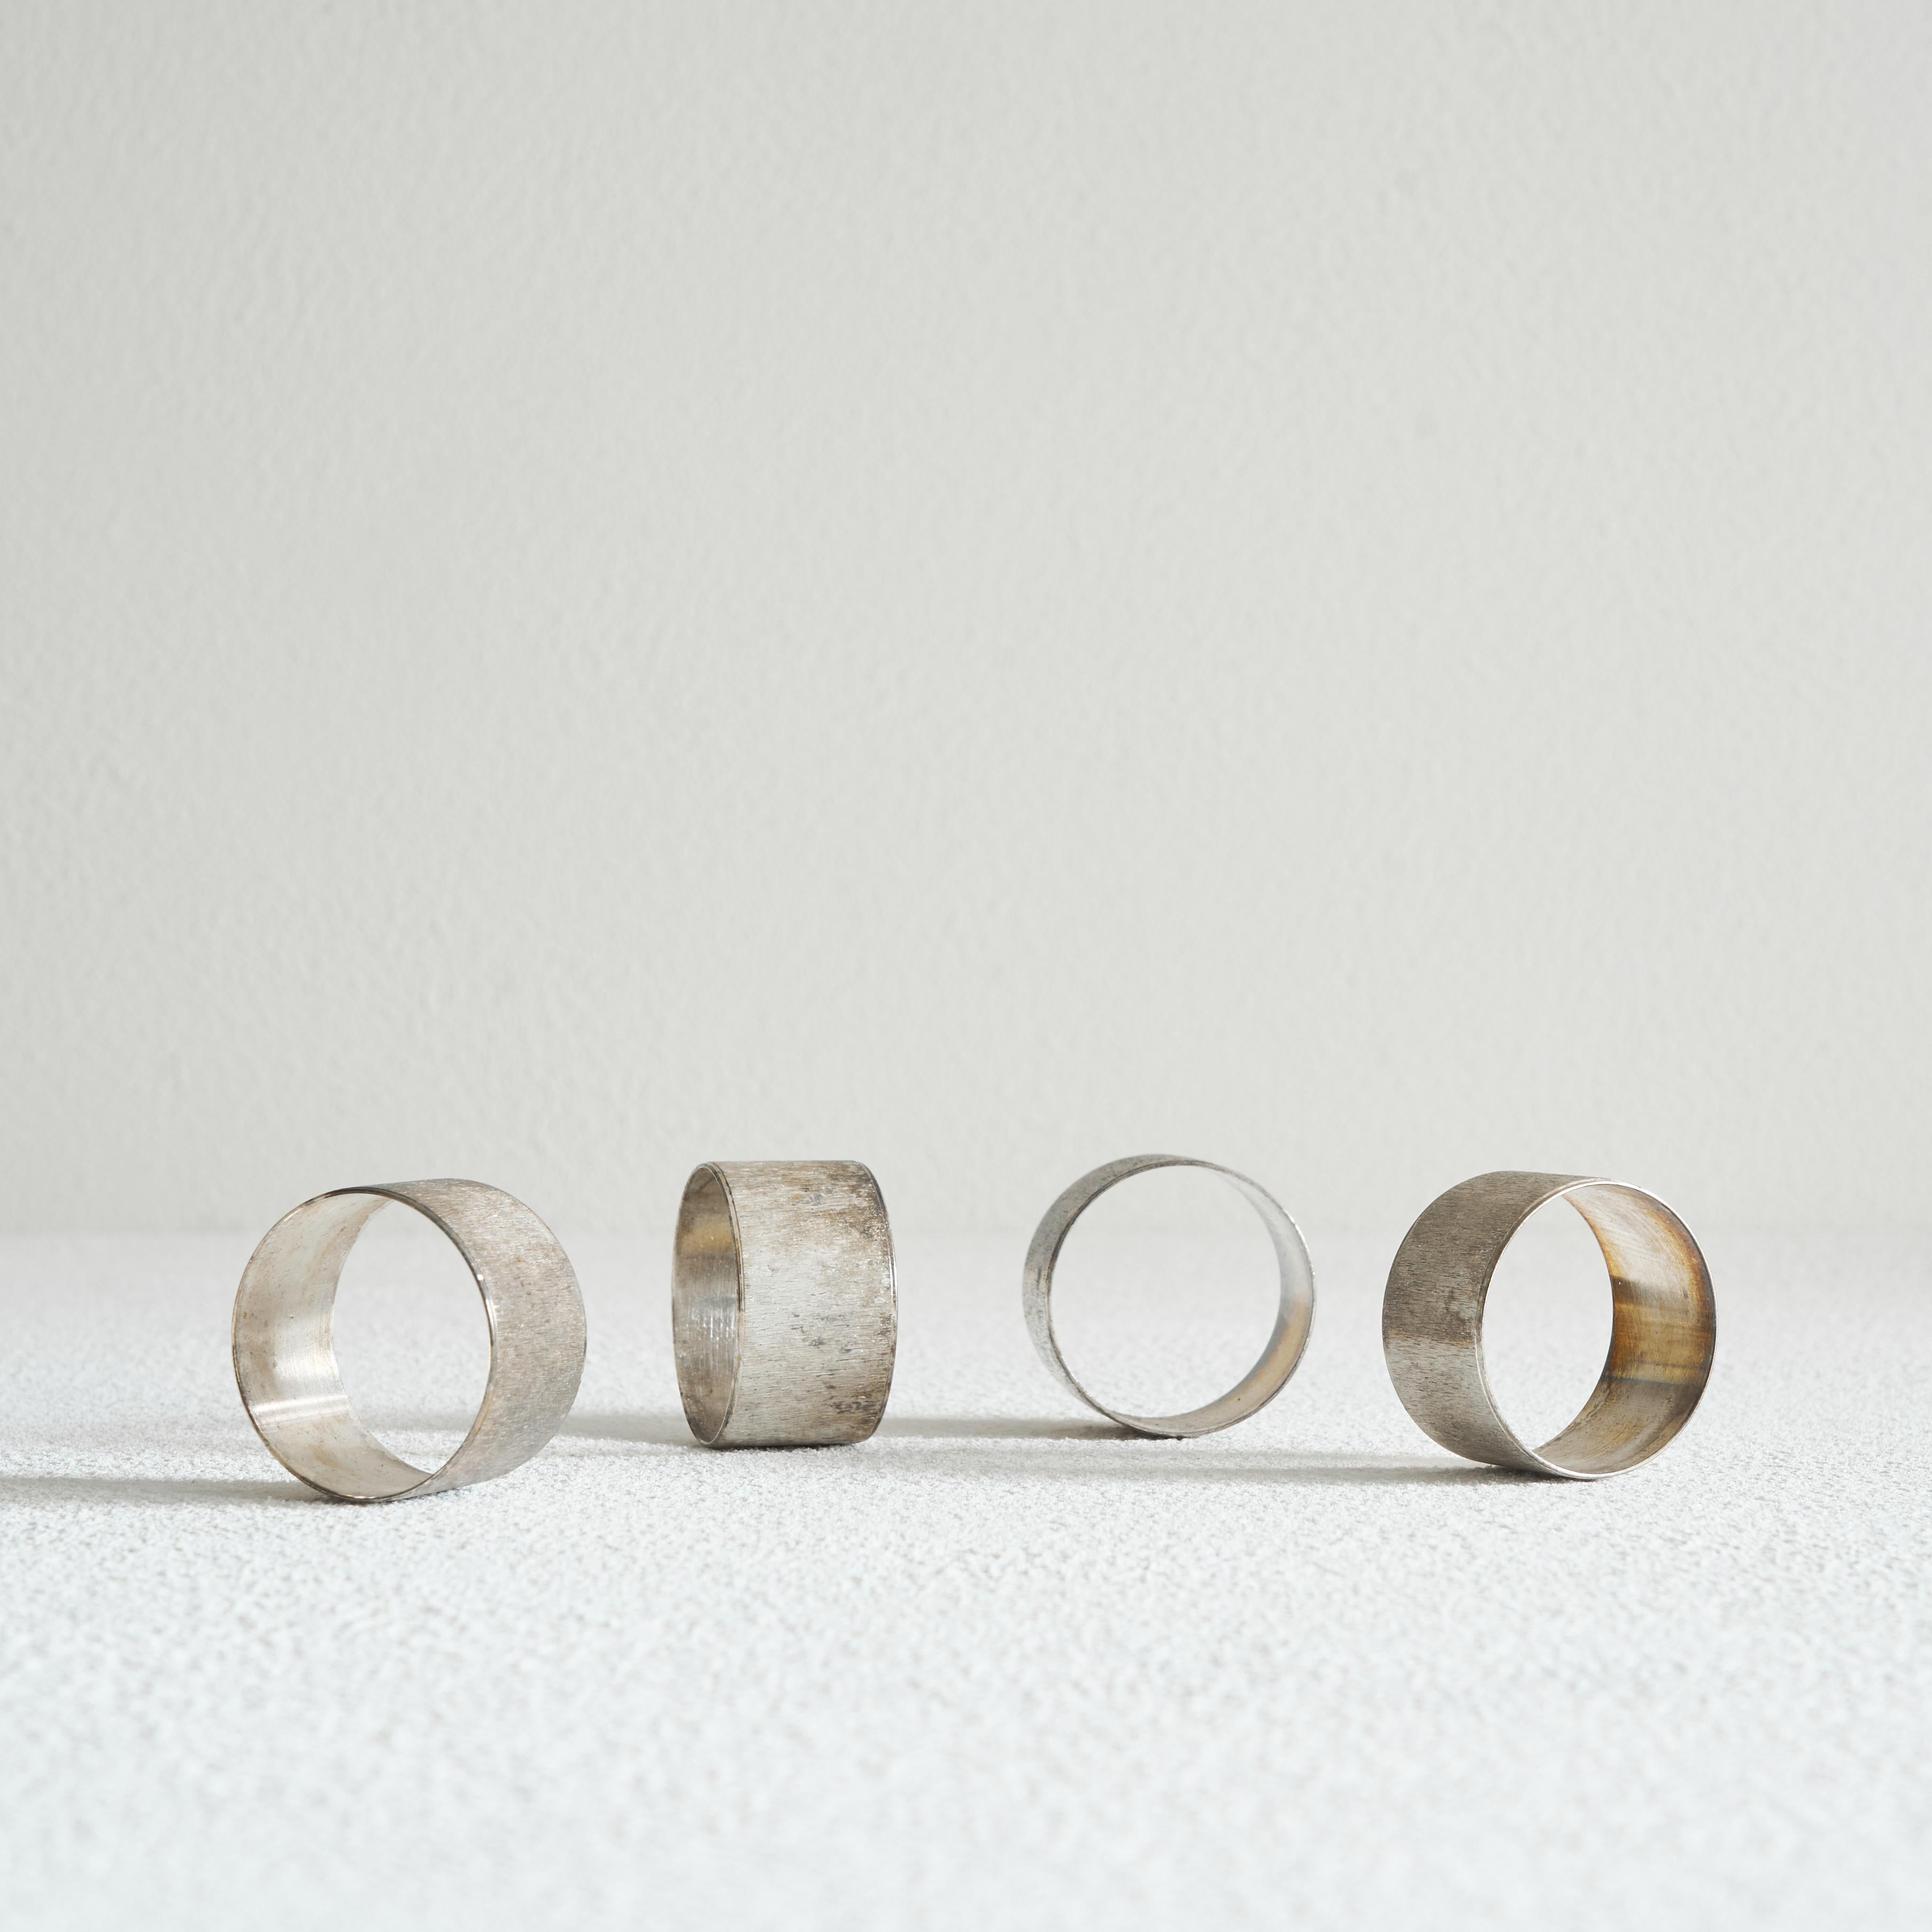 Set of 4 midcentury Napkin Rings in Patinated Silver.

Beautiful midcentury set of 4 napkin rings in highly patinated silver. Wonderful texture and rich patination, which give these napkin rings a very interesting appearance. If you like your